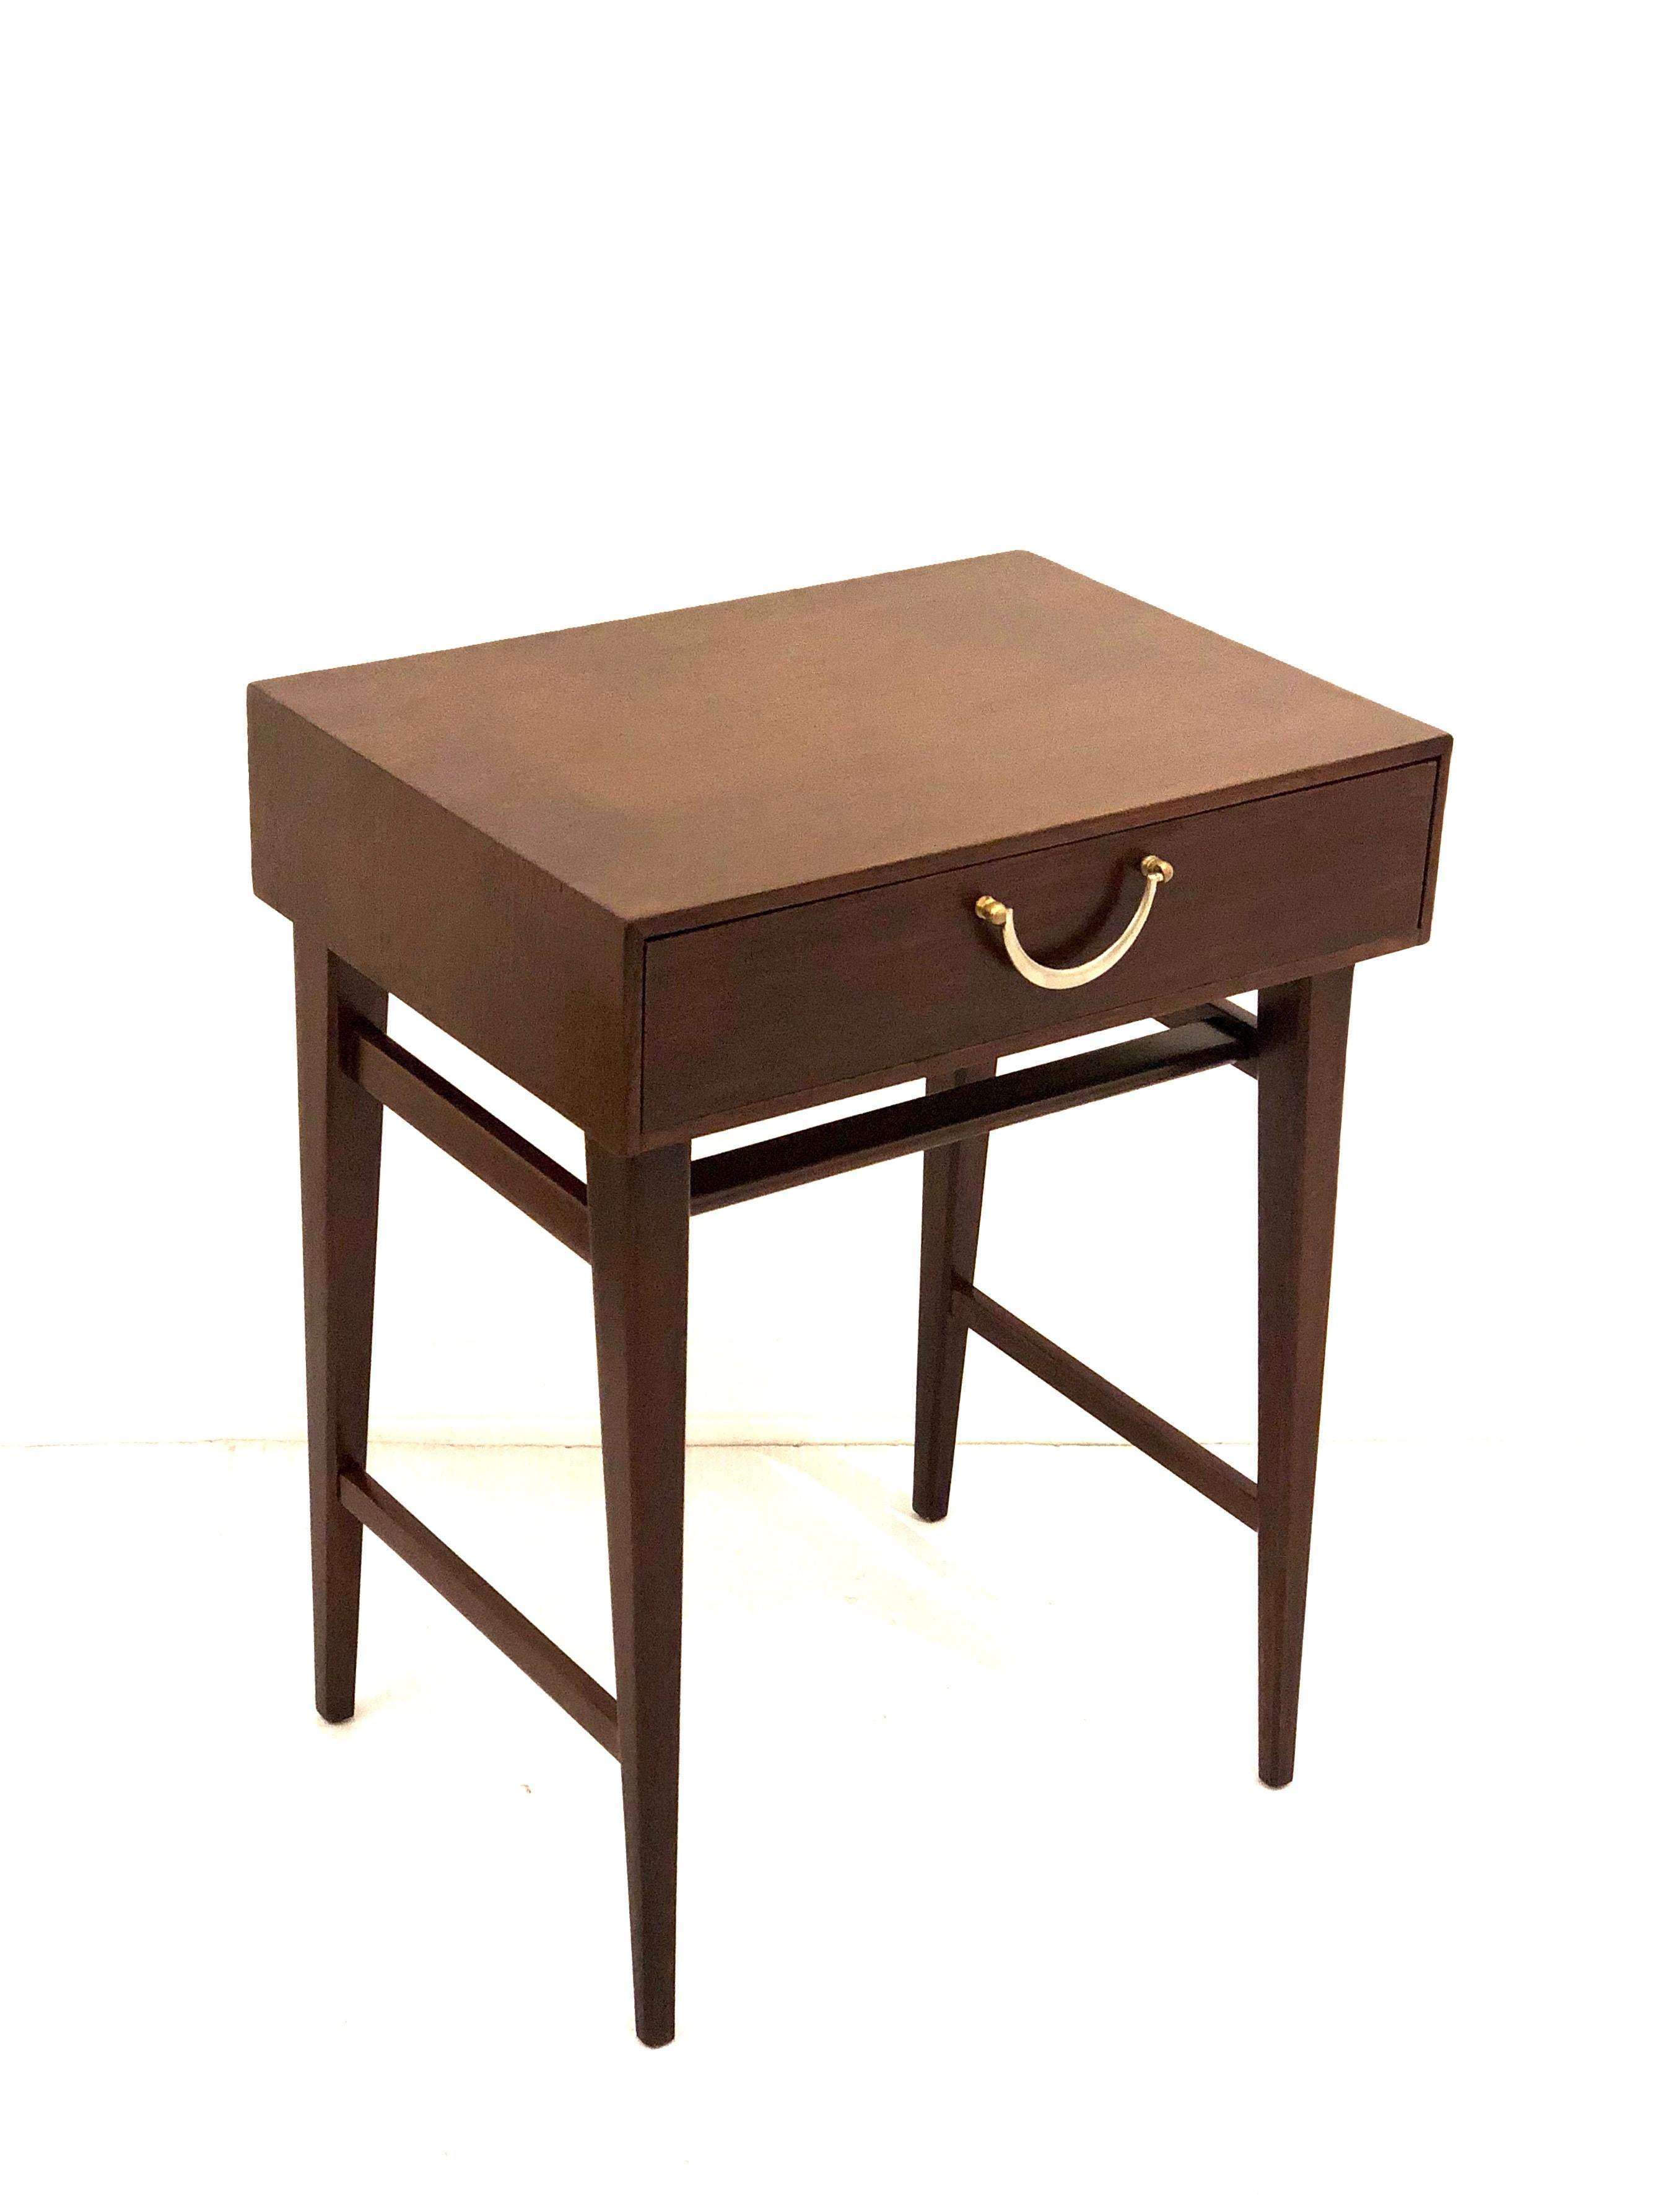 Petite mahogany end table designed by Alphons Loebenstein, for Meredew furniture, freshly refinished can be used as a nightstand or entry table.